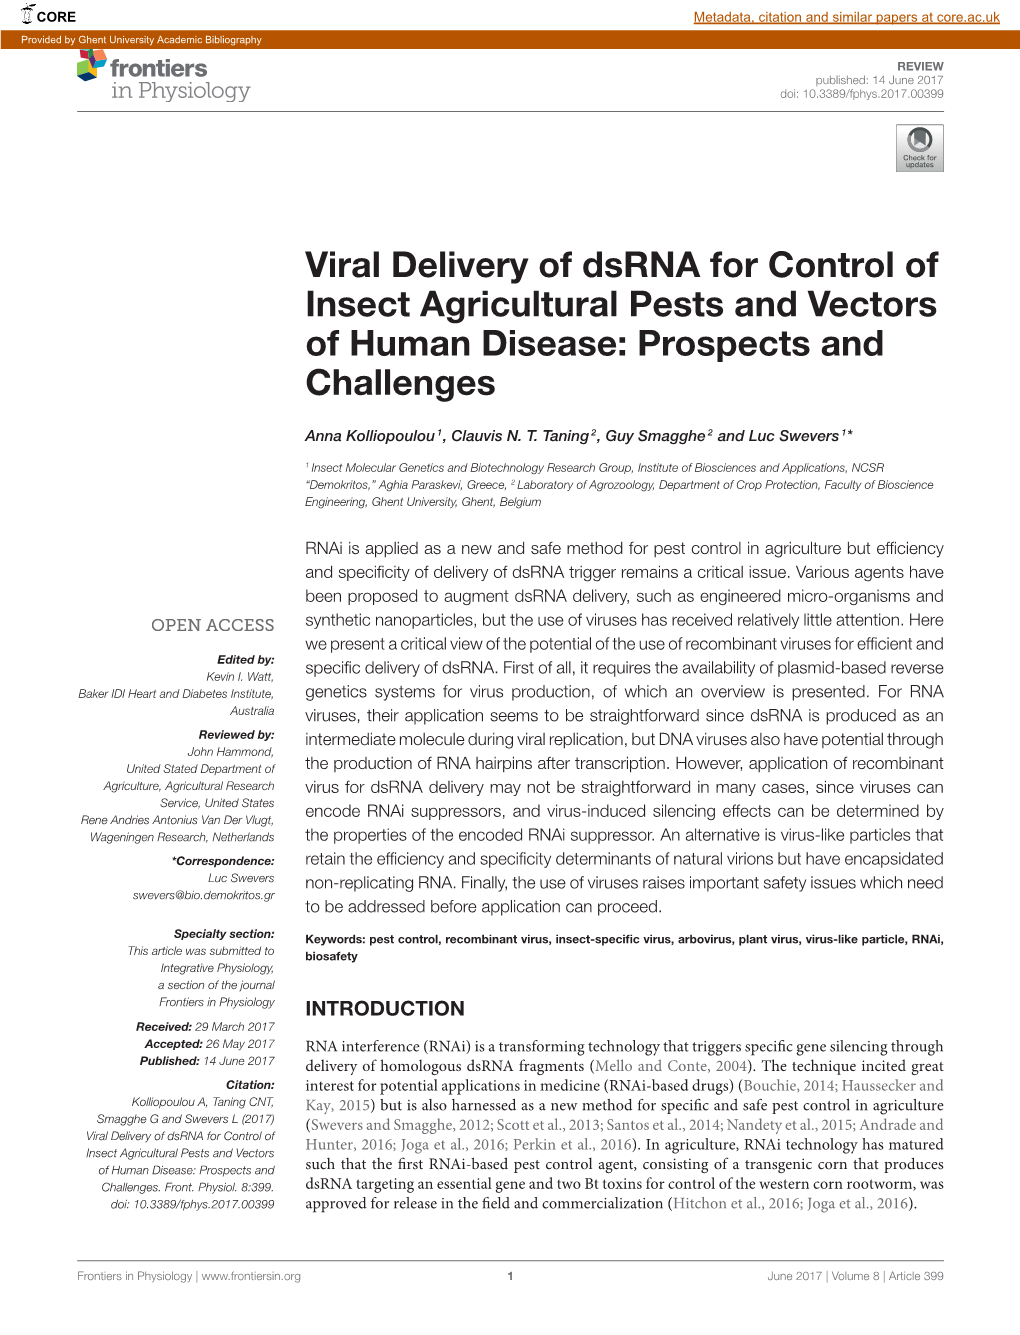 Viral Delivery of Dsrna for Control of Insect Agricultural Pests and Vectors of Human Disease: Prospects and Challenges